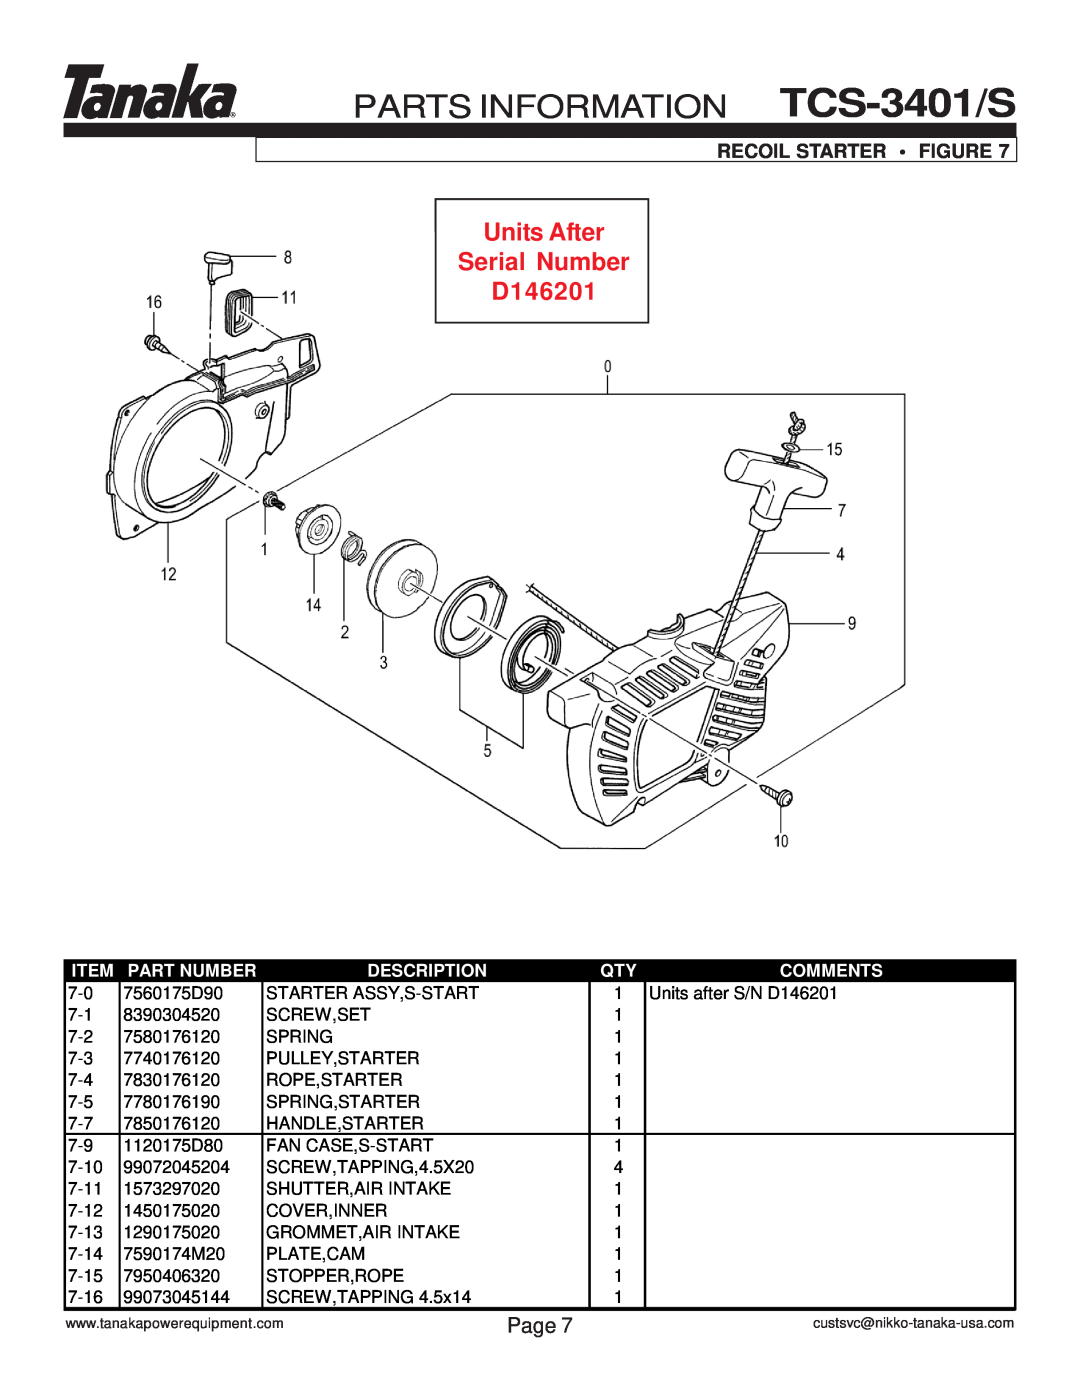 Tanaka manual Units After Serial Number D146201, PARTS INFORMATION TCS-3401/S, Recoil Starter Figure, Page, Part Number 